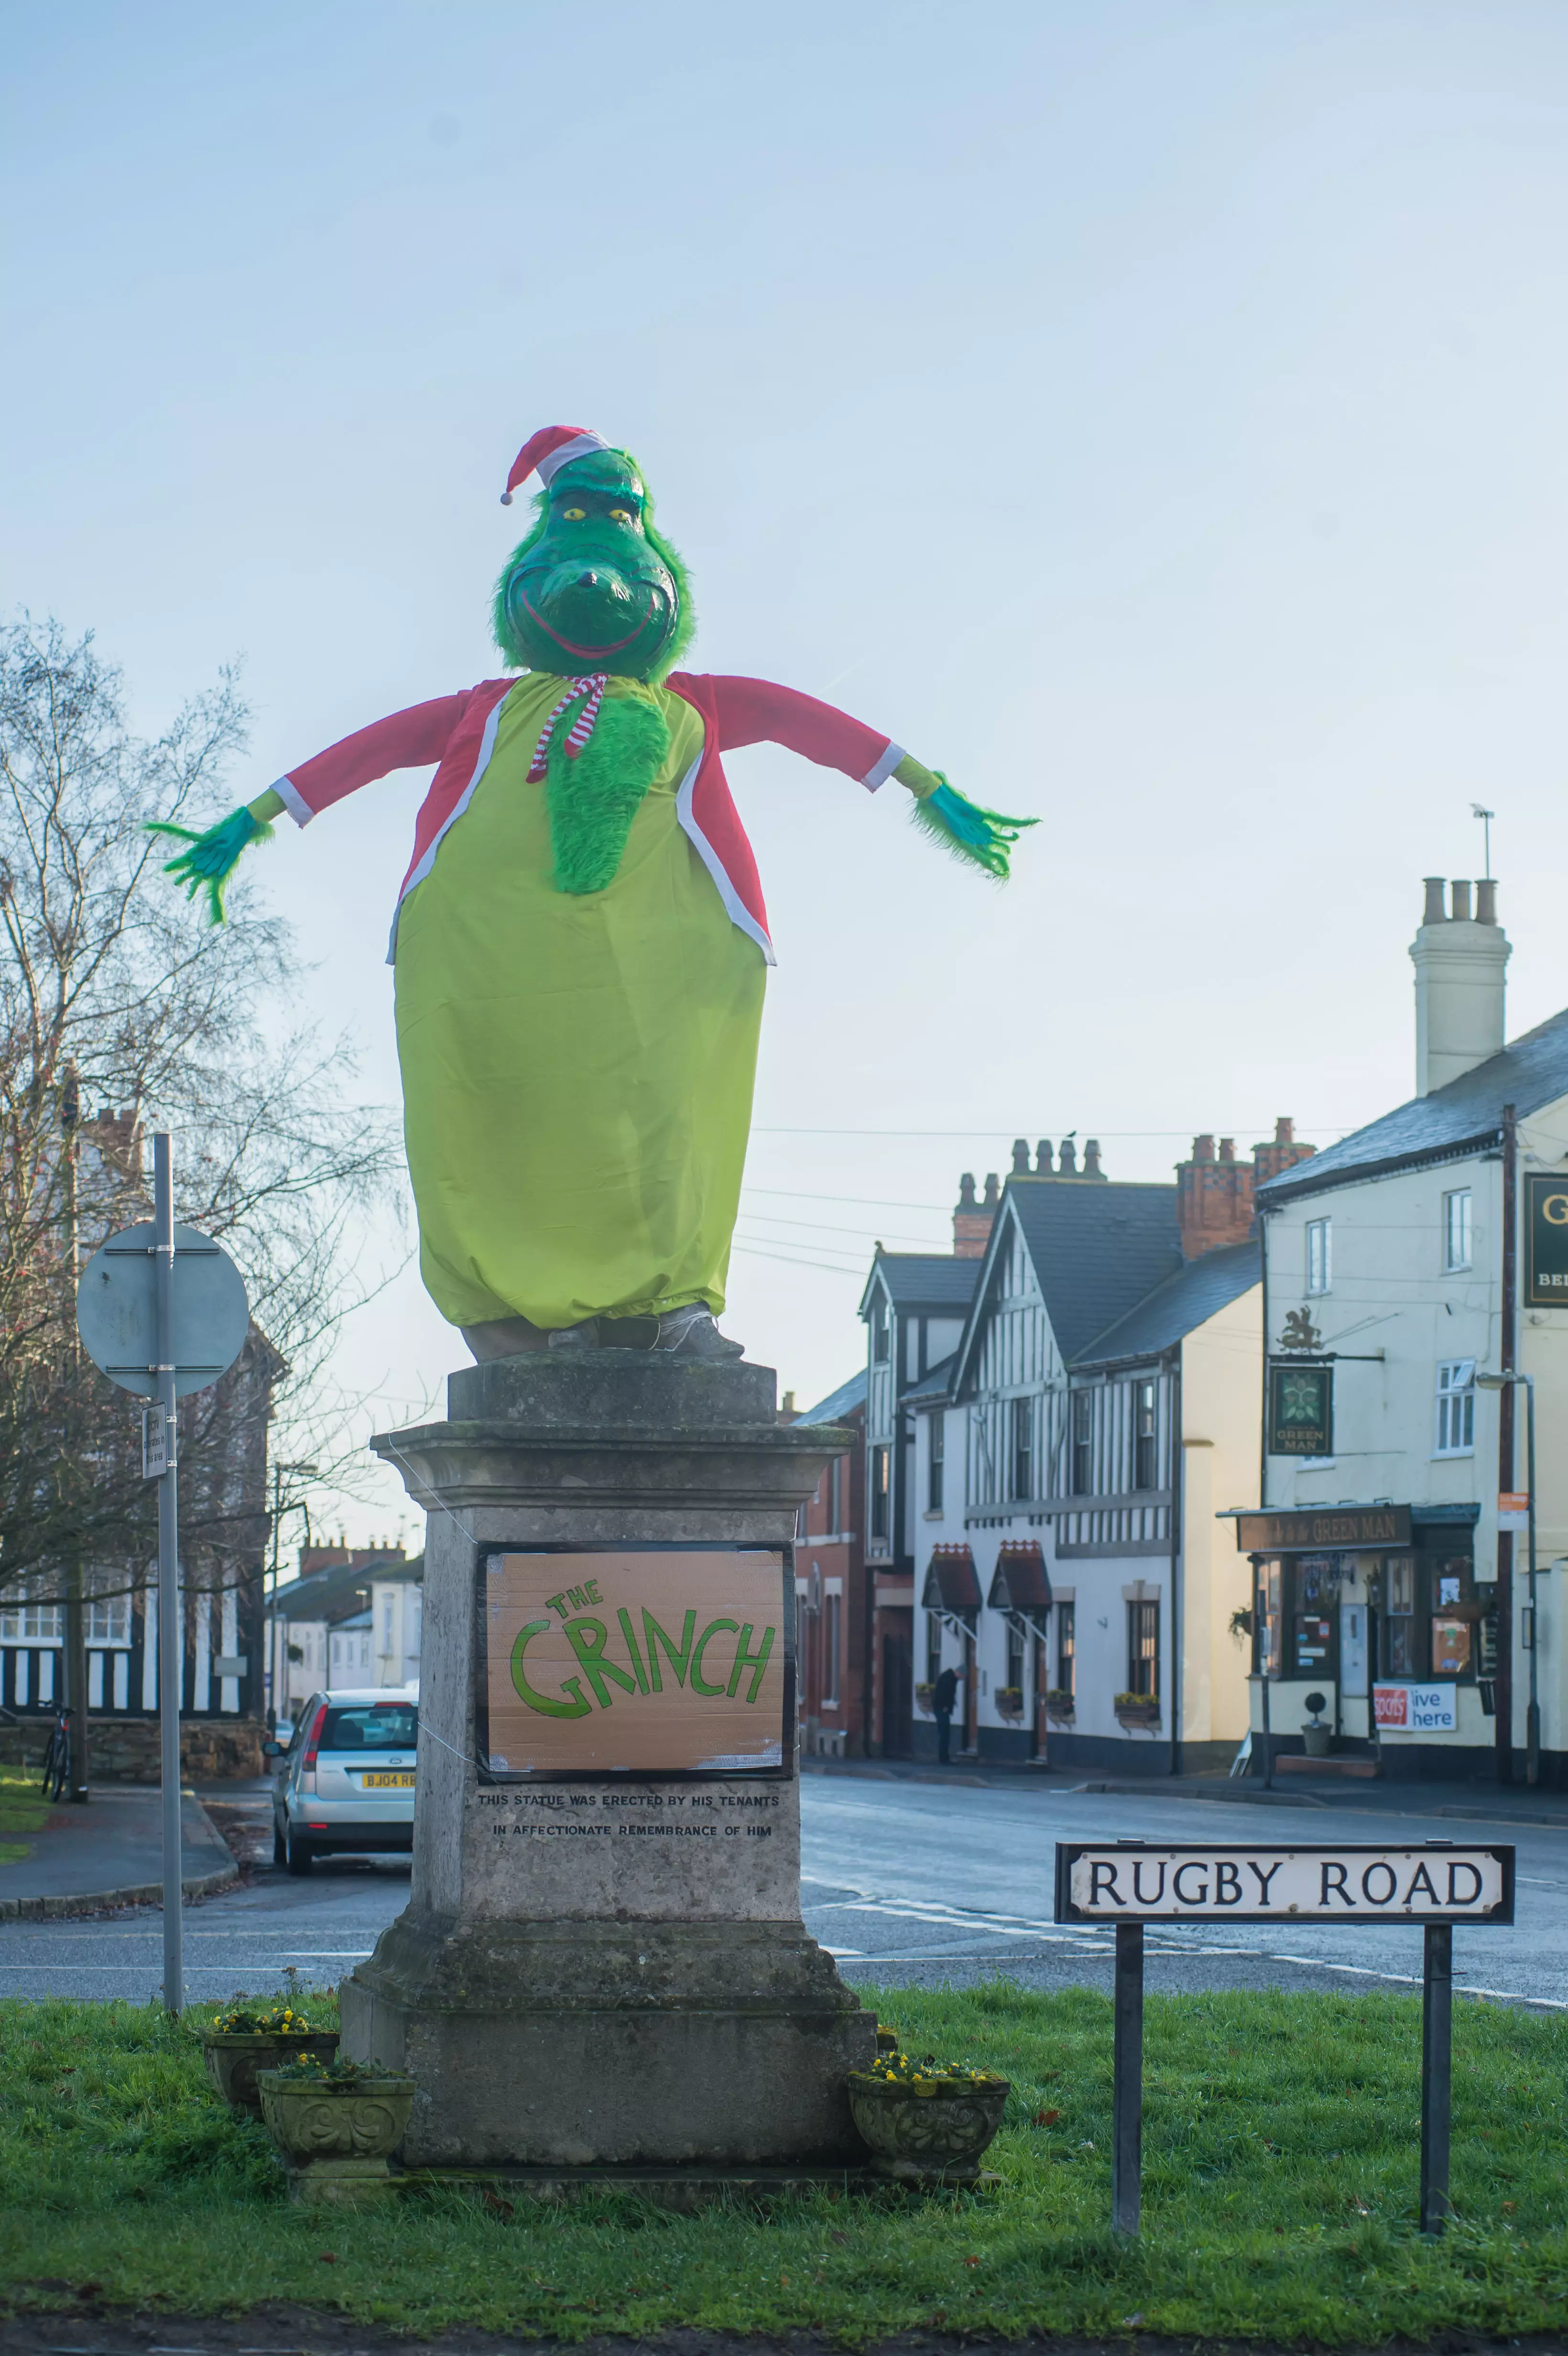 The statue was dressed up as The Grinch back in 2018 (